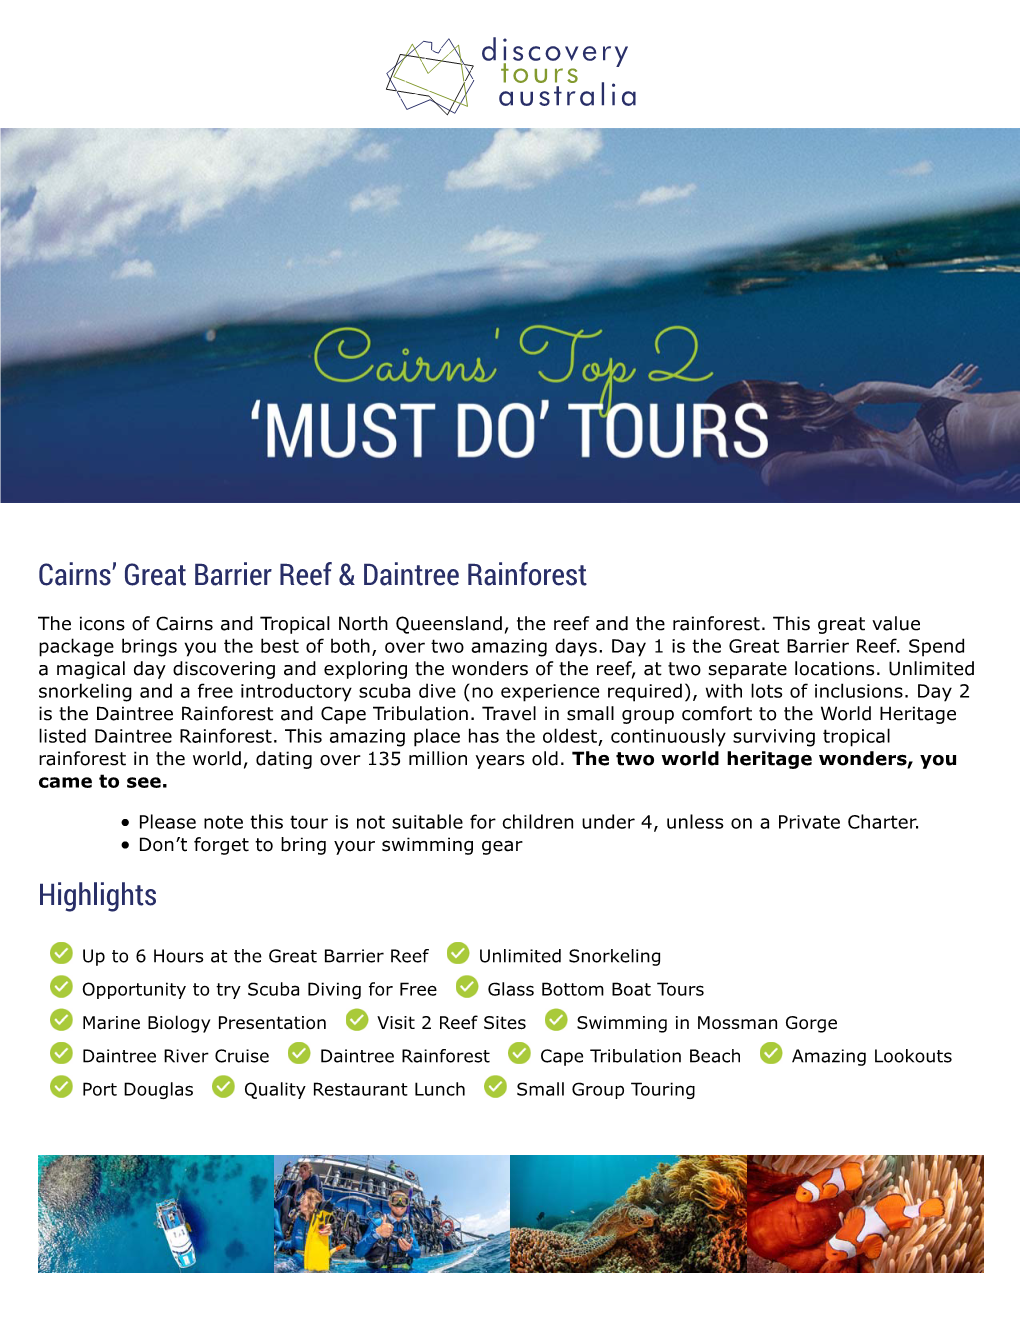 Cairns Reef and Daintree Rainforest Tours